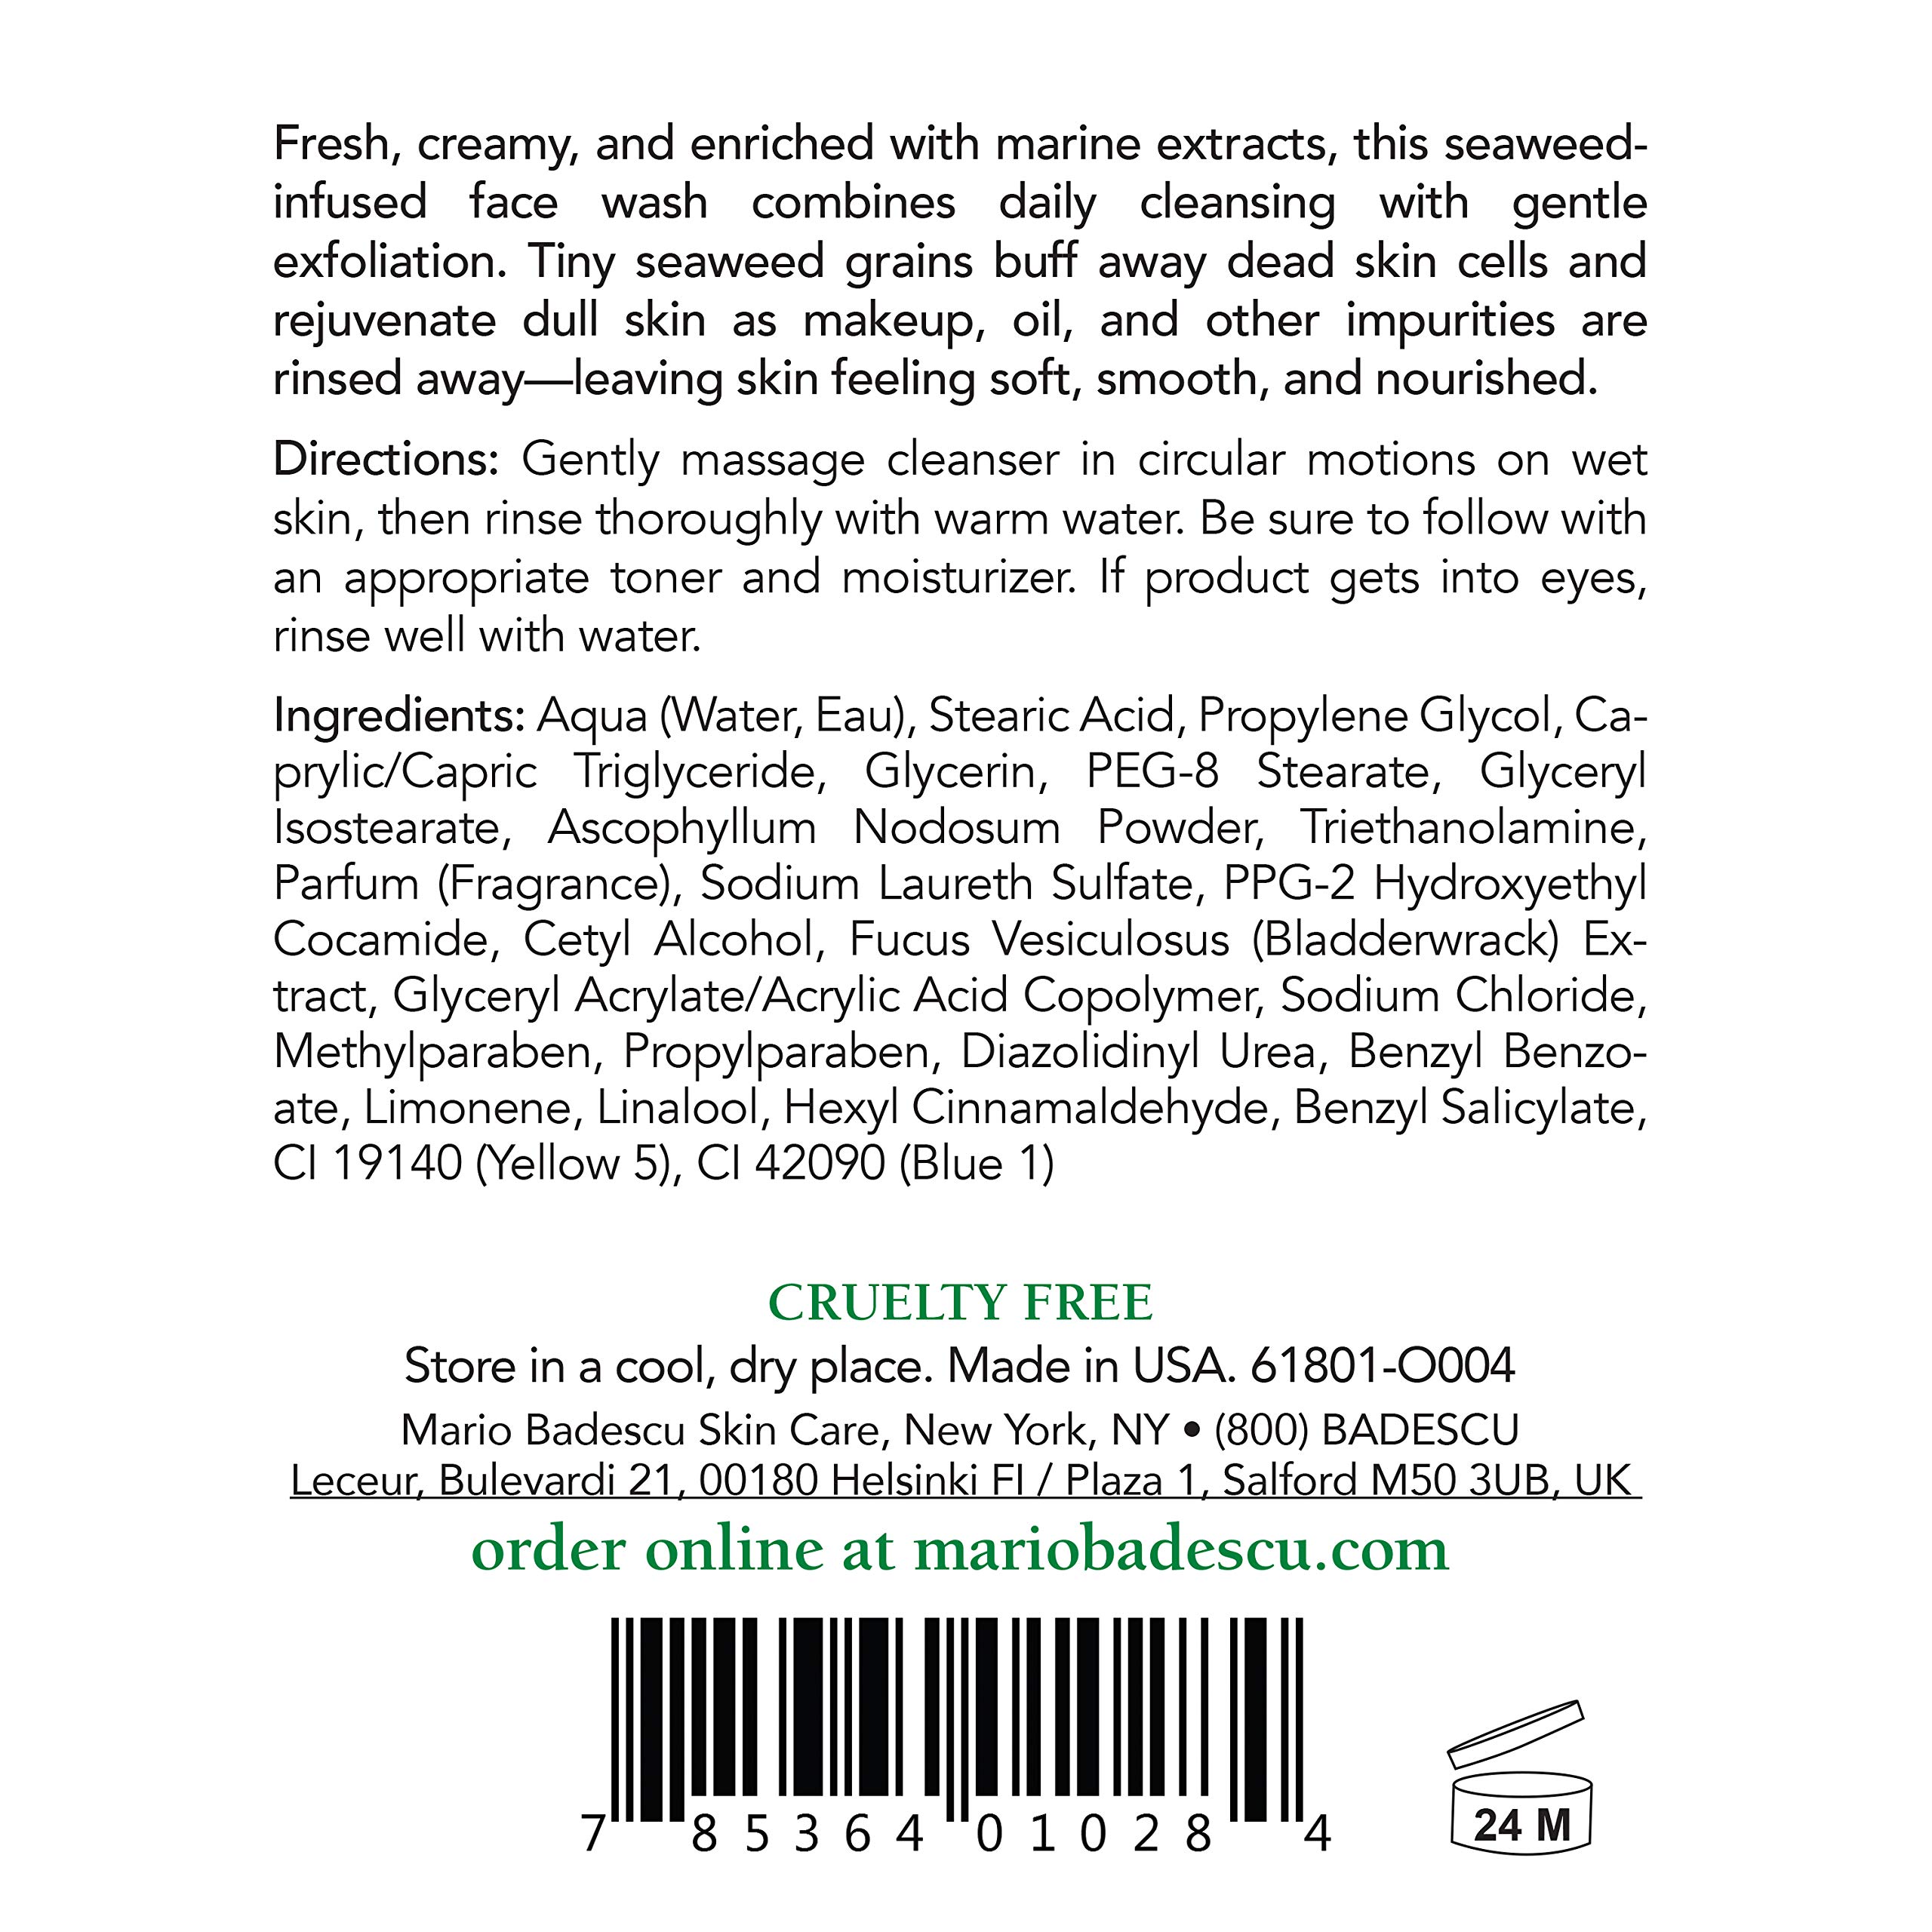 Mario Badescu Seaweed Cleansing Soap for All Skin Types |Creamy Cleanser that Gently Exfoliates |Formulated with Seaweed Grains & Bladderwrack Extract